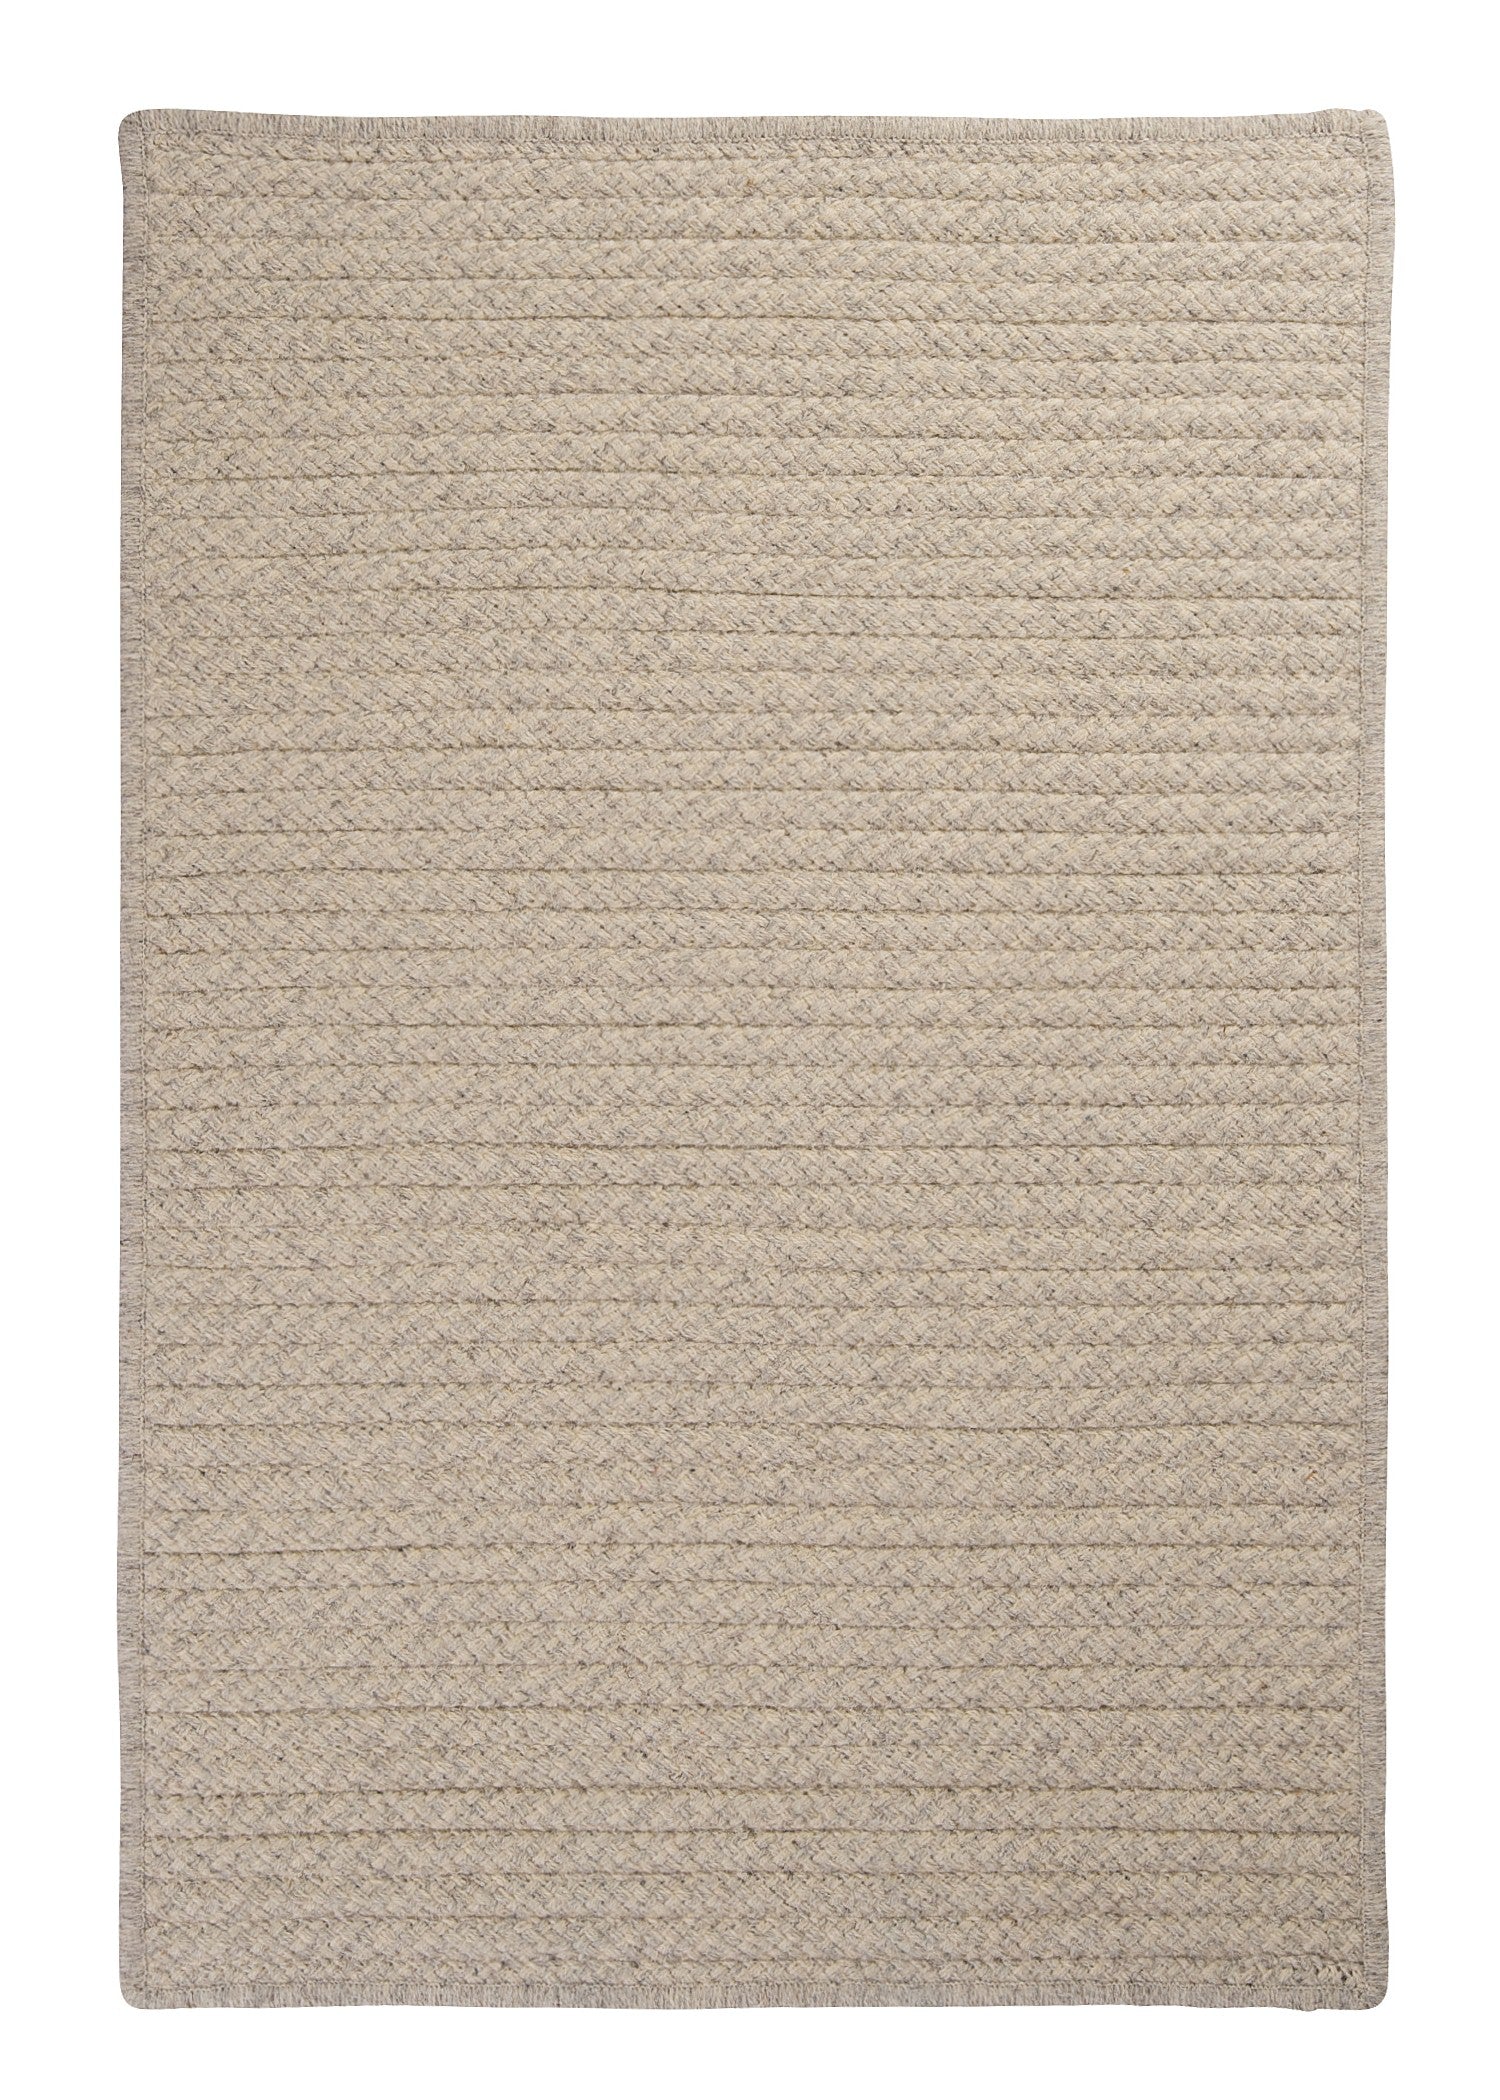 Colonial Mills Natural Wool Houndstooth HD31 Cream Modern Area Rug